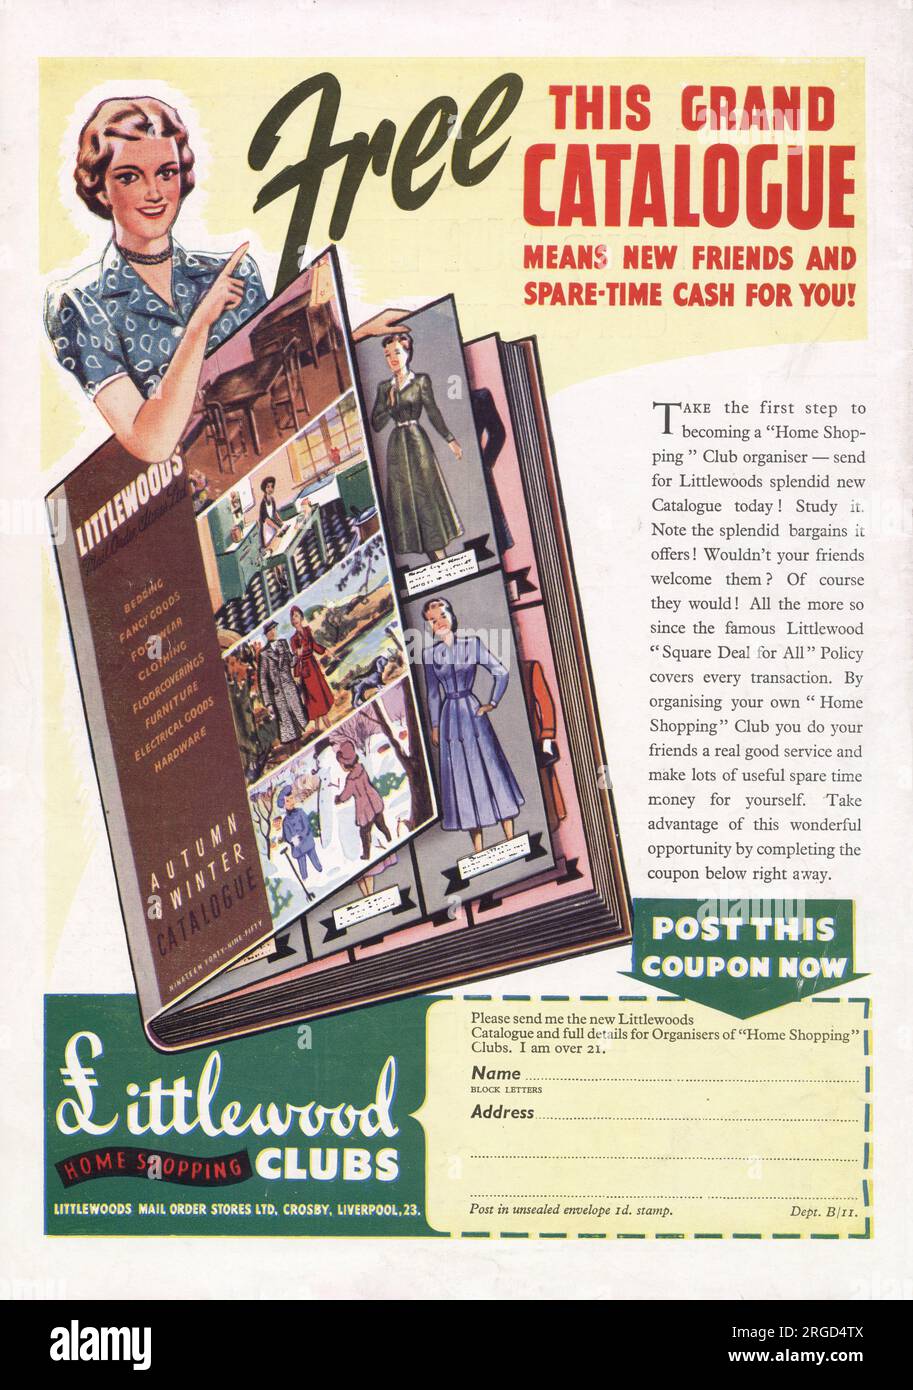 Advertisement for Littlewoods Home Shopping Clubs, recruiting Club organisers. Litttlewoods began as a football pools betting company in Liverpool, 1923, and expanded into home shopping in 1932, initially targeting their pools customers. Women organised clubs so that friends and family could shop via catalogue and spread payments. Stock Photo